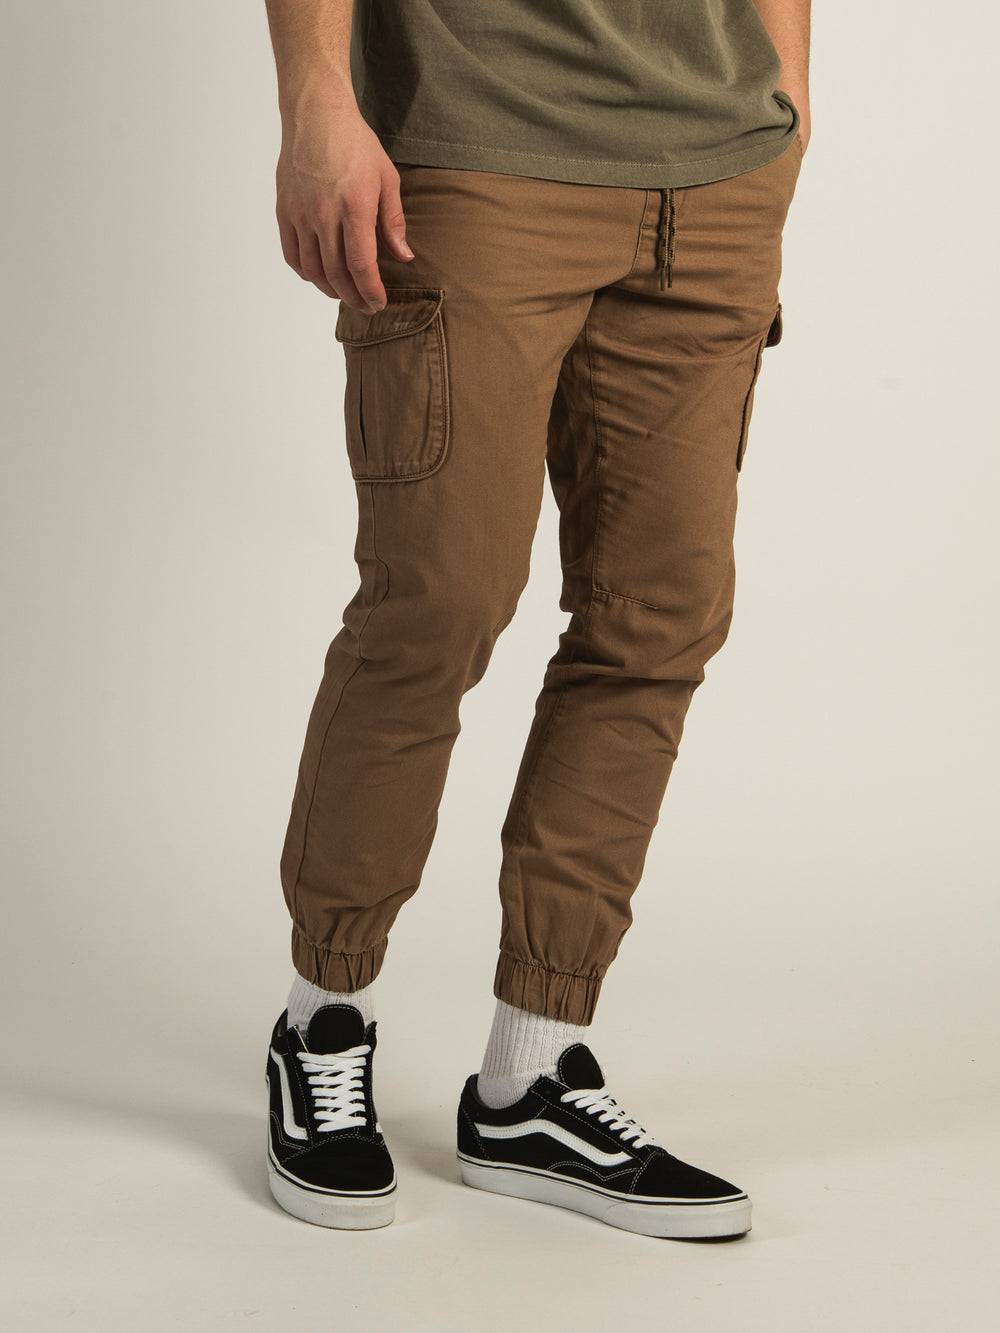 TAINTED CAMDEN CARGO PANT  - CLEARANCE